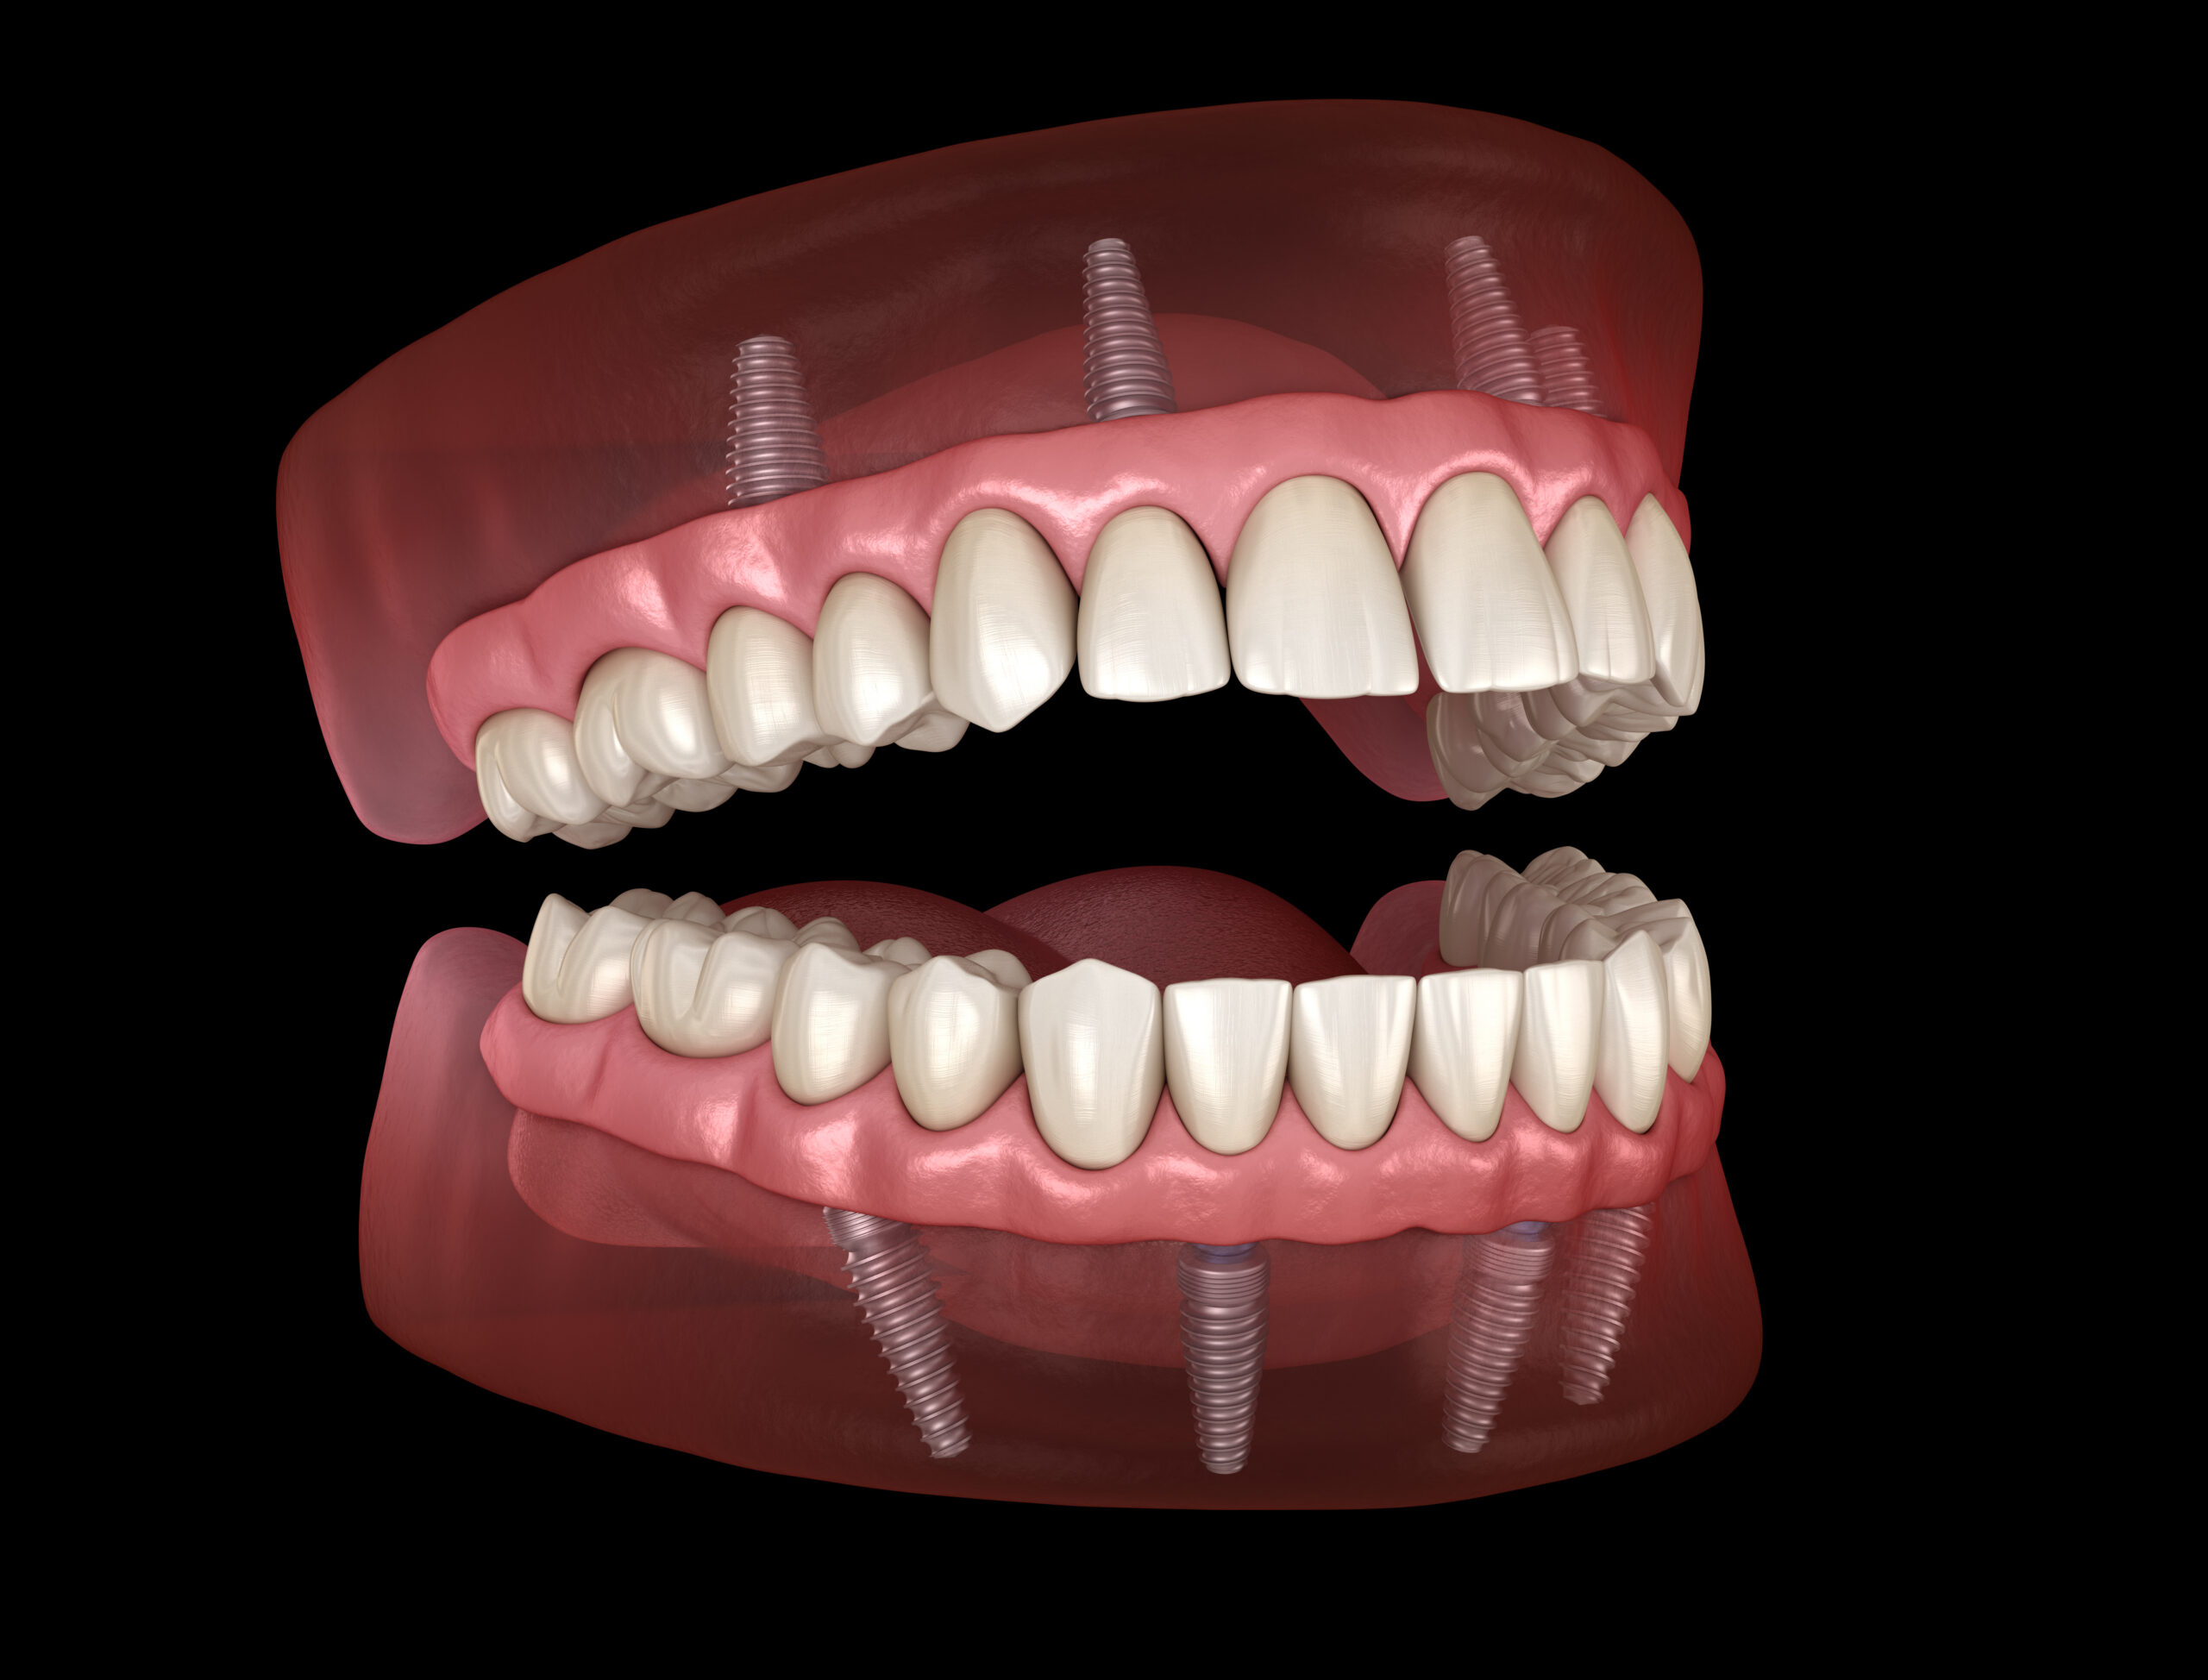 Figuring Out How To Improve The Function Of Your Smile? You Should Get Full Mouth Dental Implants In East Lansing, MI